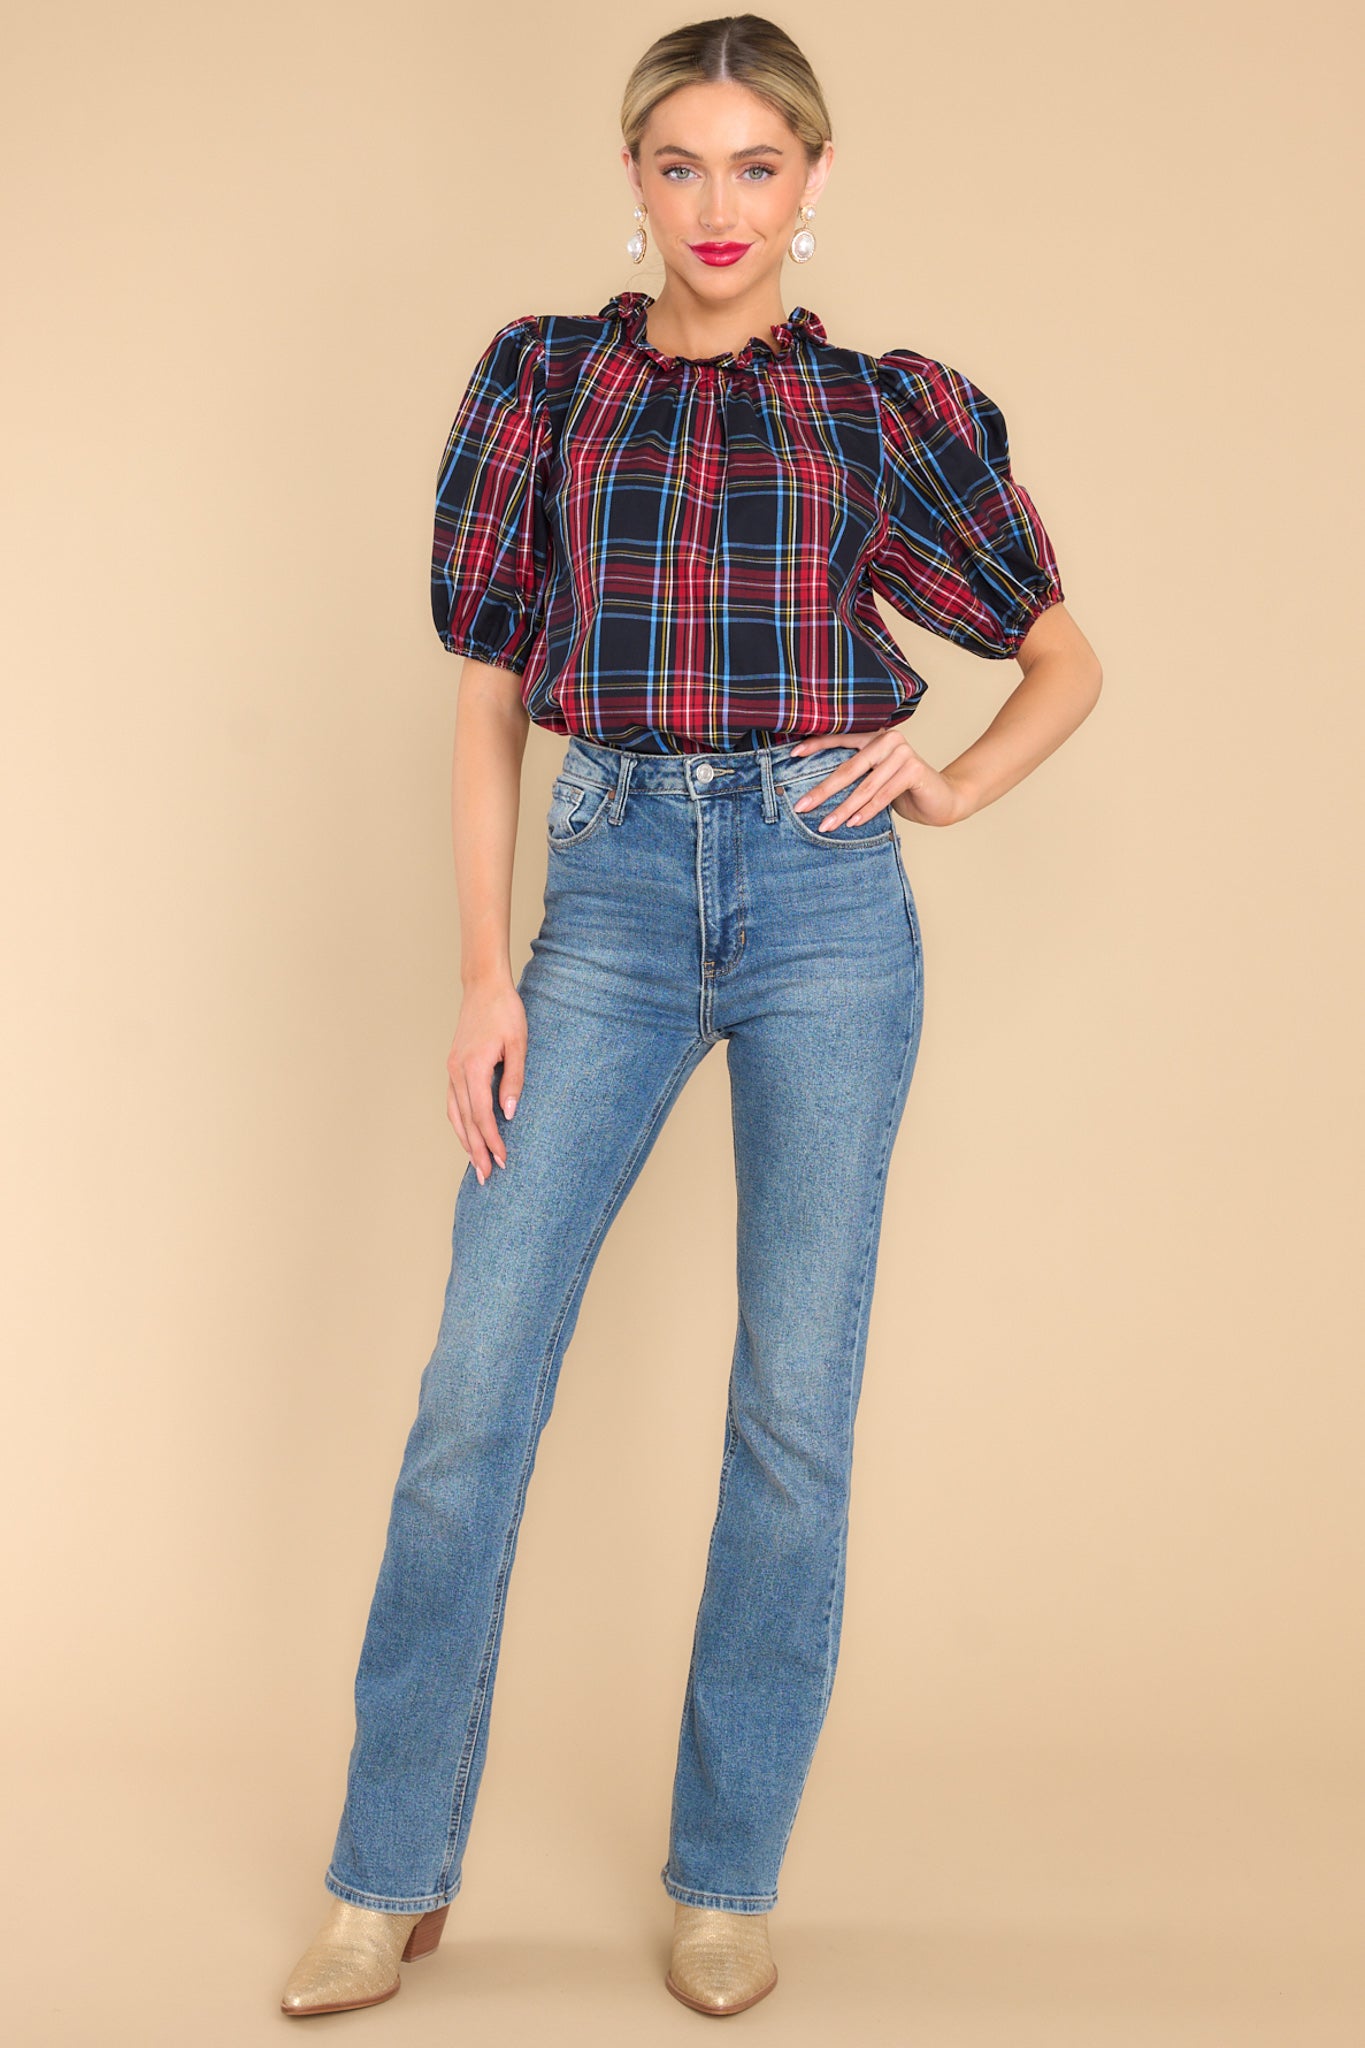 Full body view of this top that features a ruffled neckline, a keyhole closure in the back, elastic cuffed puffy sleeves, and a plaid pattern.